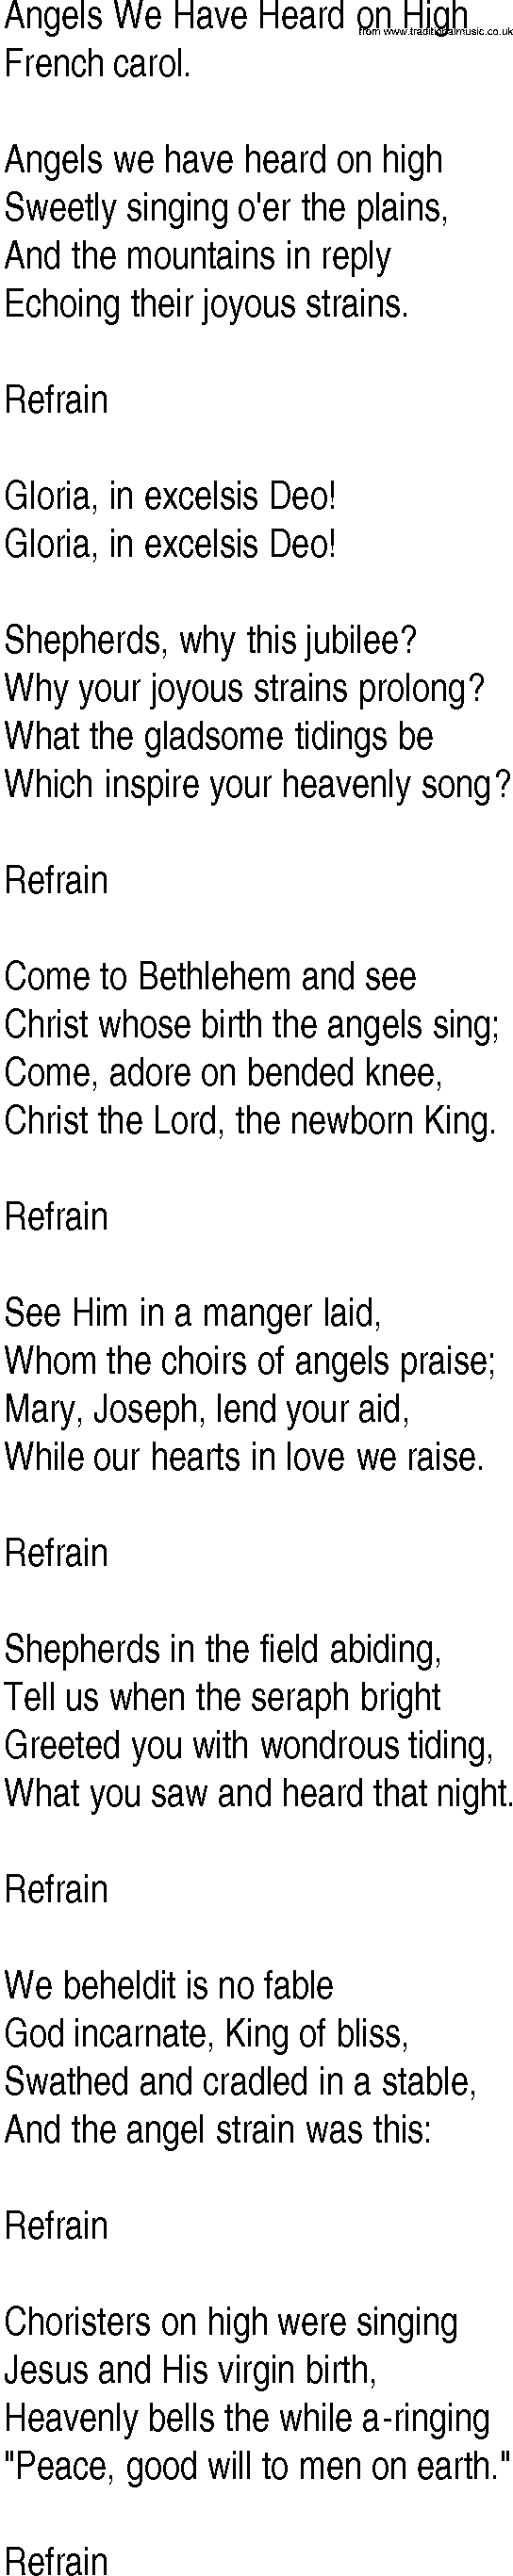 Hymn and Gospel Song: Angels We Have Heard on High by French carol lyrics